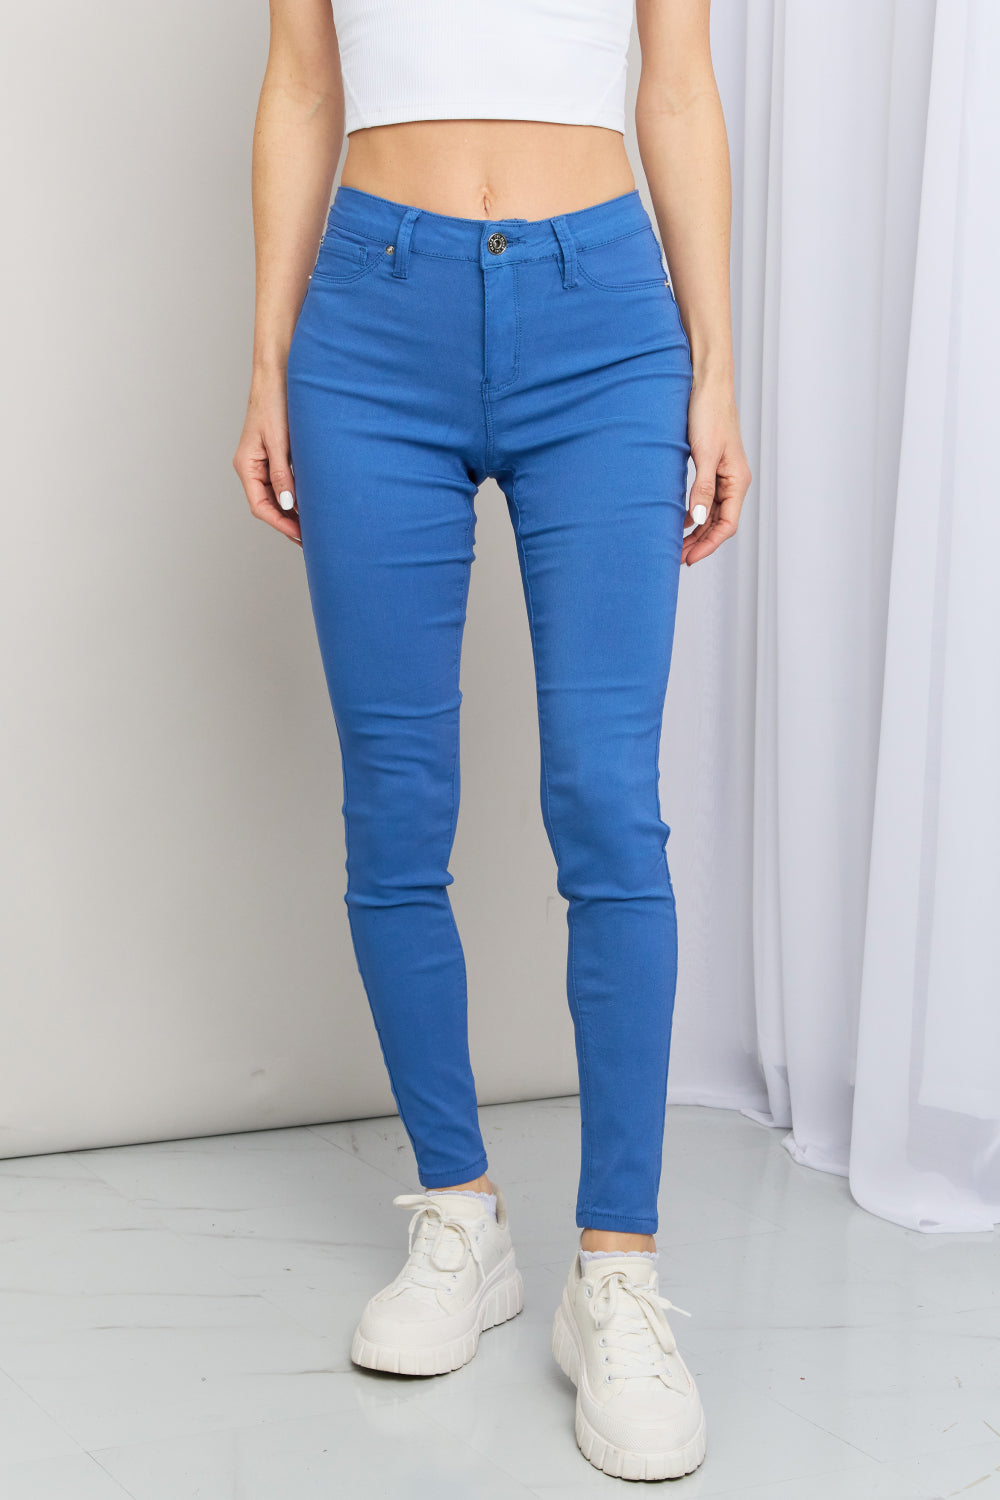 - YMI Jeanswear Kate Hyper-Stretch -Rise Skinny Jeans in Electric Blue - Ships from The US - womens jeans at TFC&H Co.